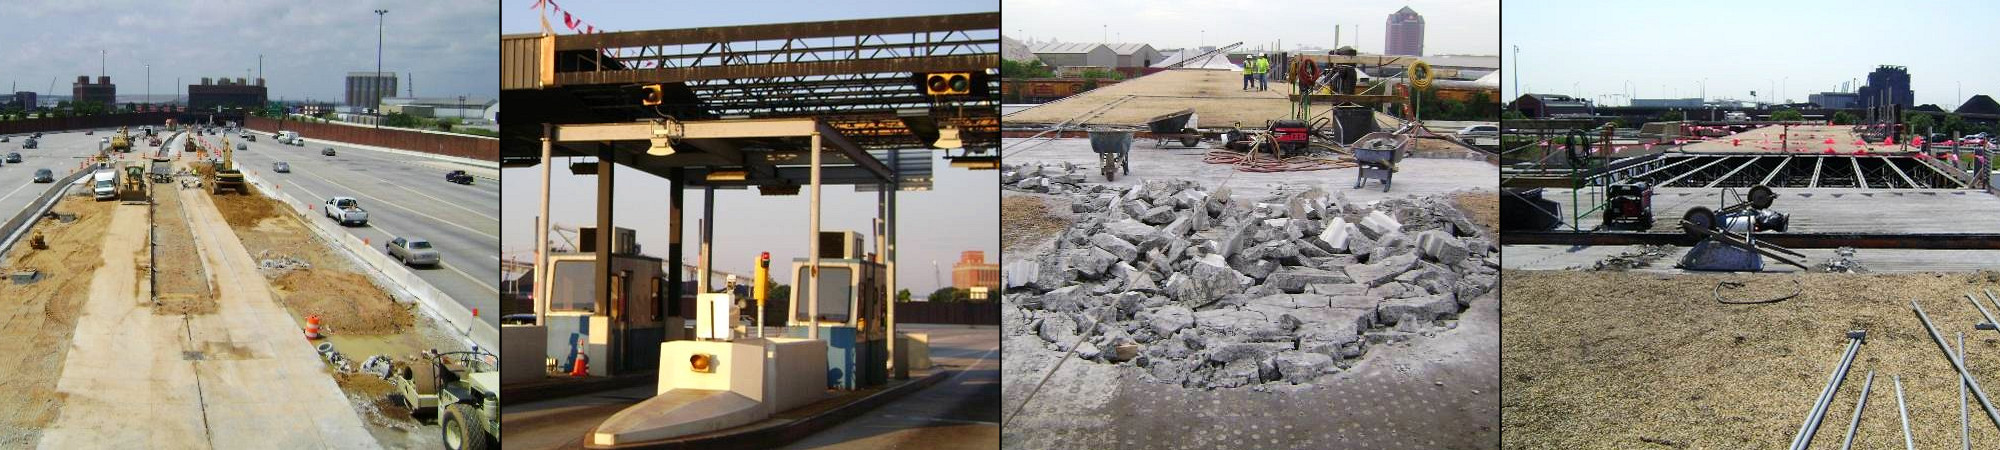 Construction Inspection for the I-95 Express Lanes Toll Plaza Construction Project